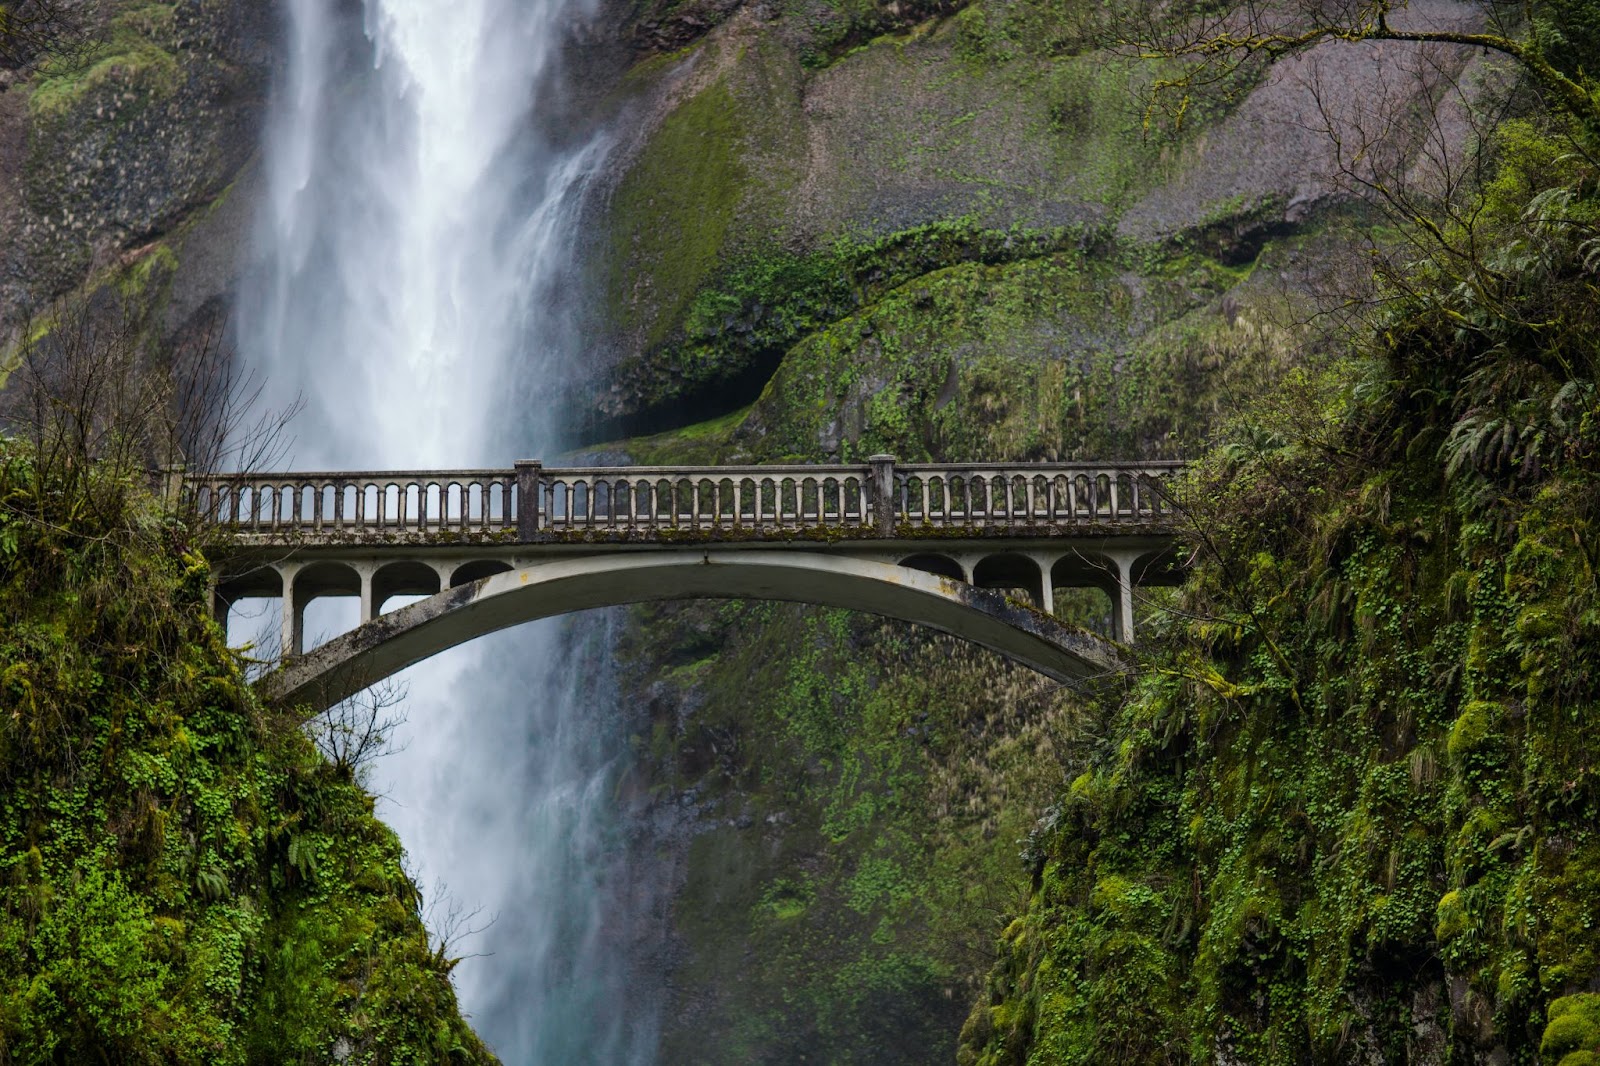 Bridge over one of the most popular waterfall hikes in the U.S.